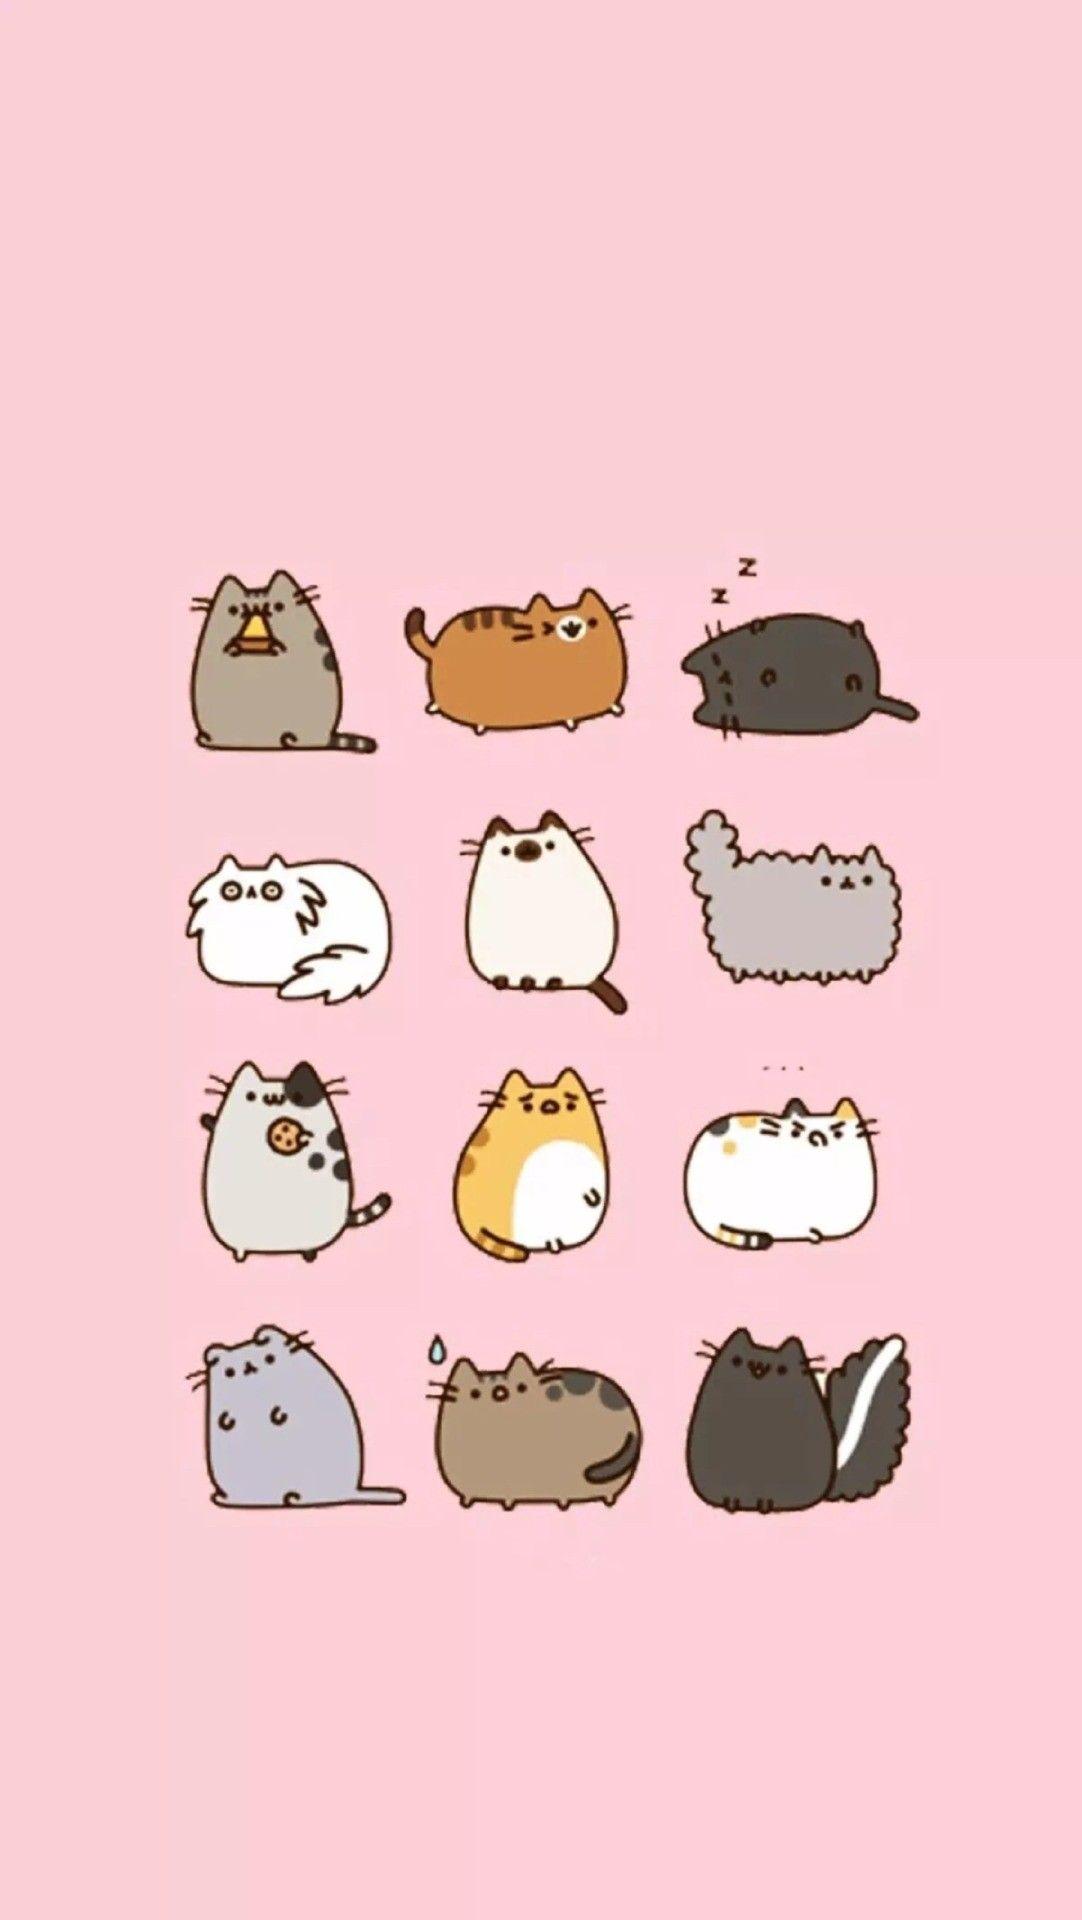 A cute cat wallpaper with many different types of animals - Pusheen, cat